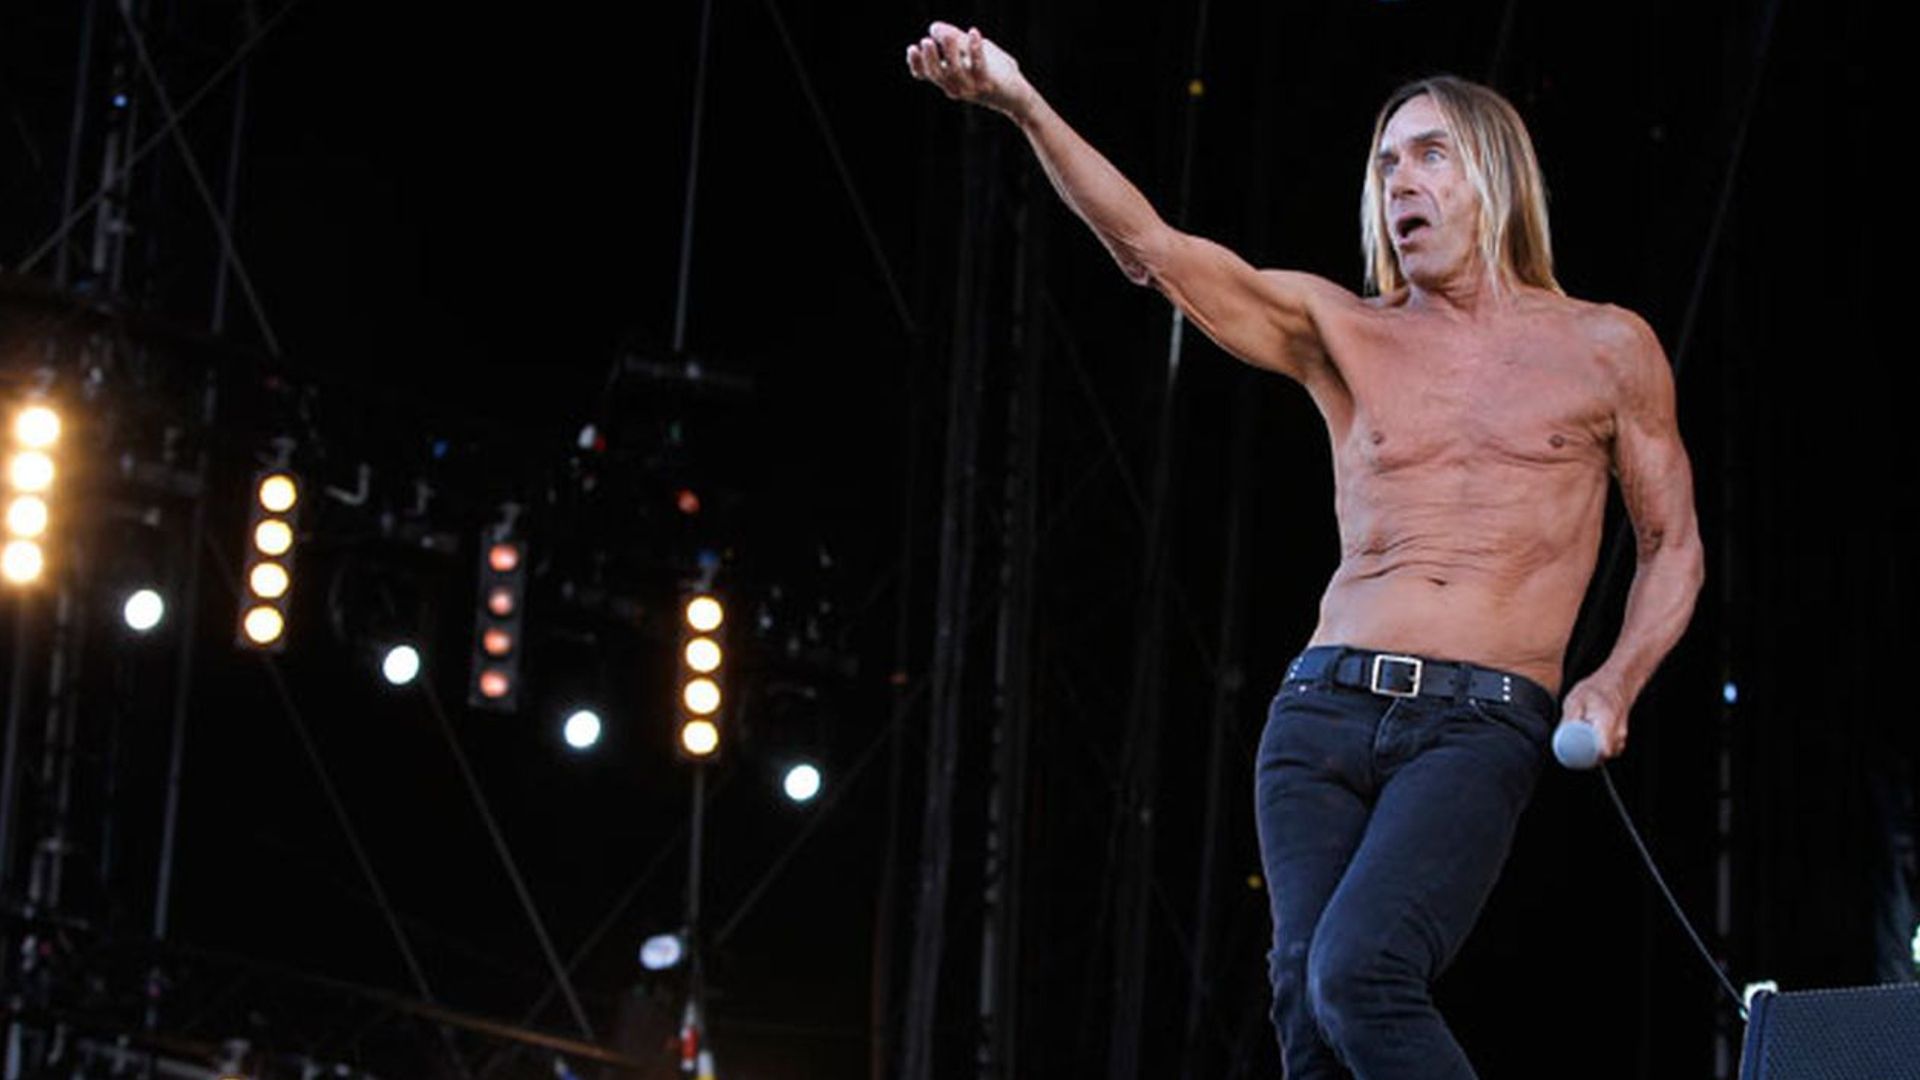 Iggy Pop canceled his concert in Russia